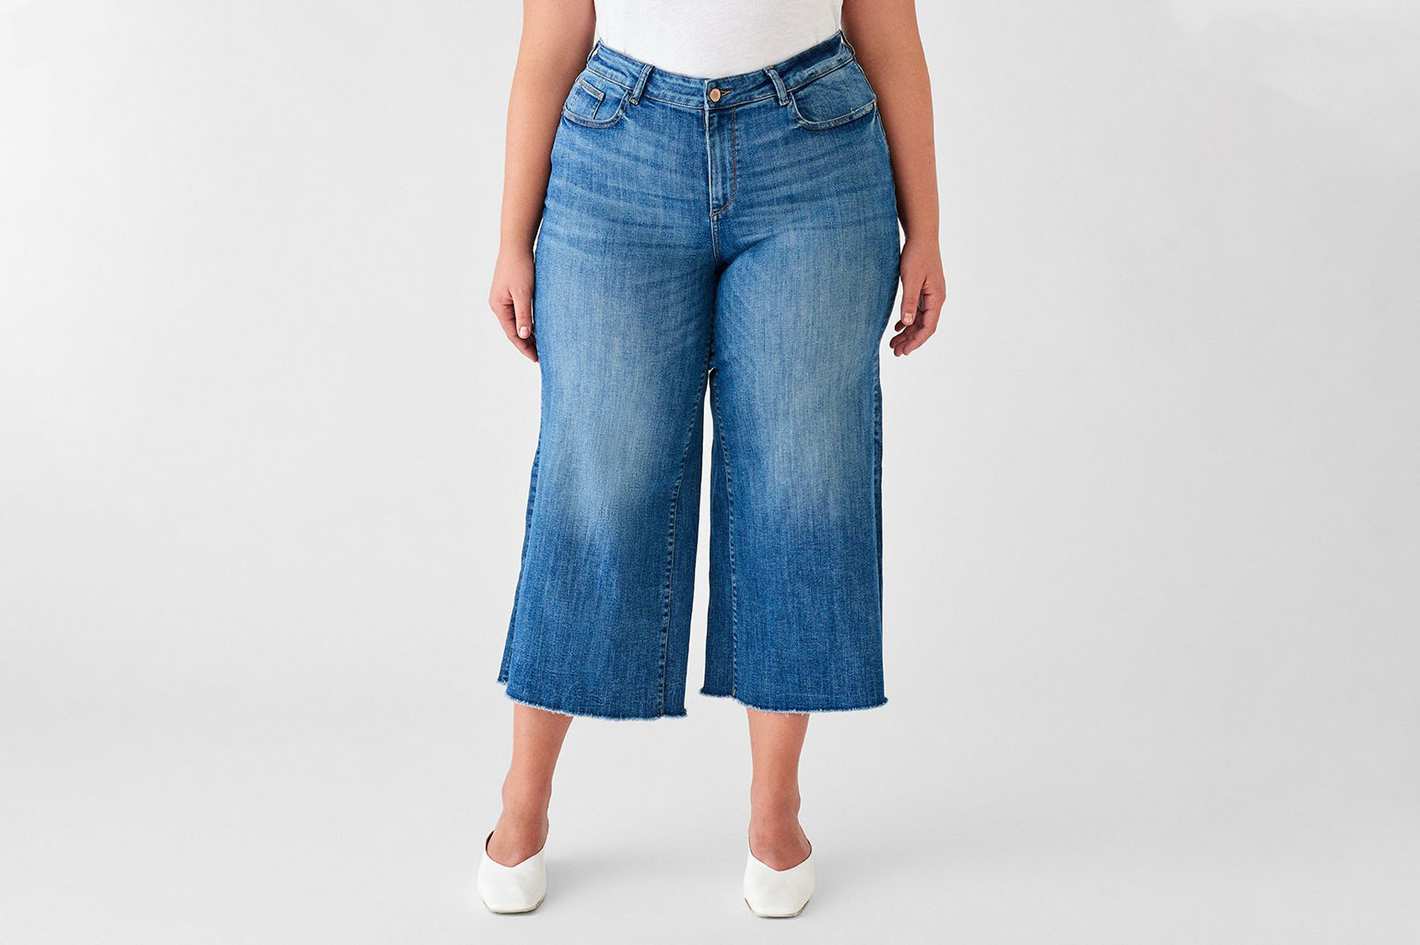 14 Stylish Basics From Inclusive Sustainable Brands